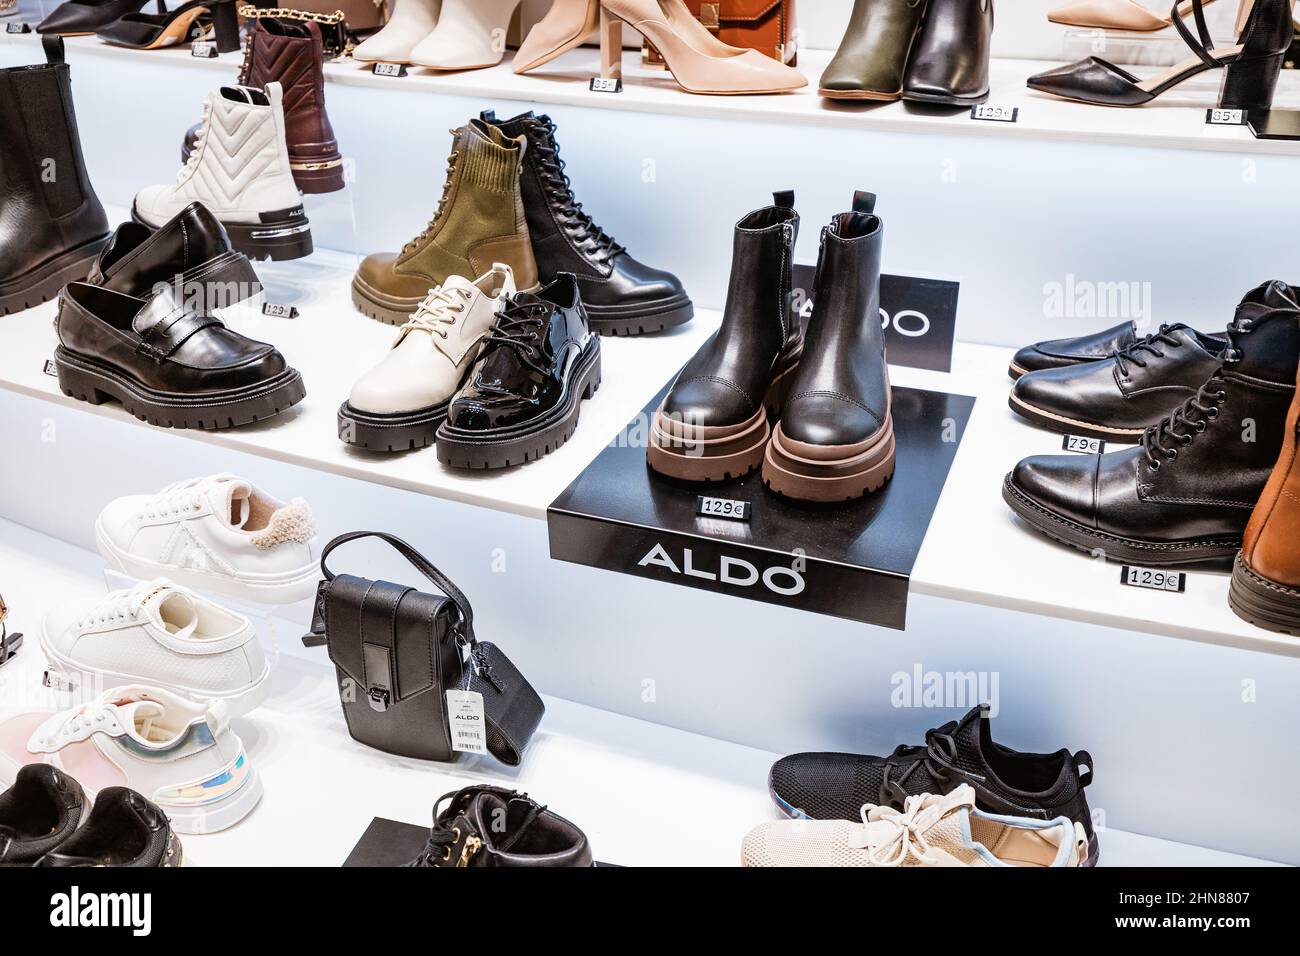 Aldo Shop Front High Resolution Stock Photography and Images - Alamy